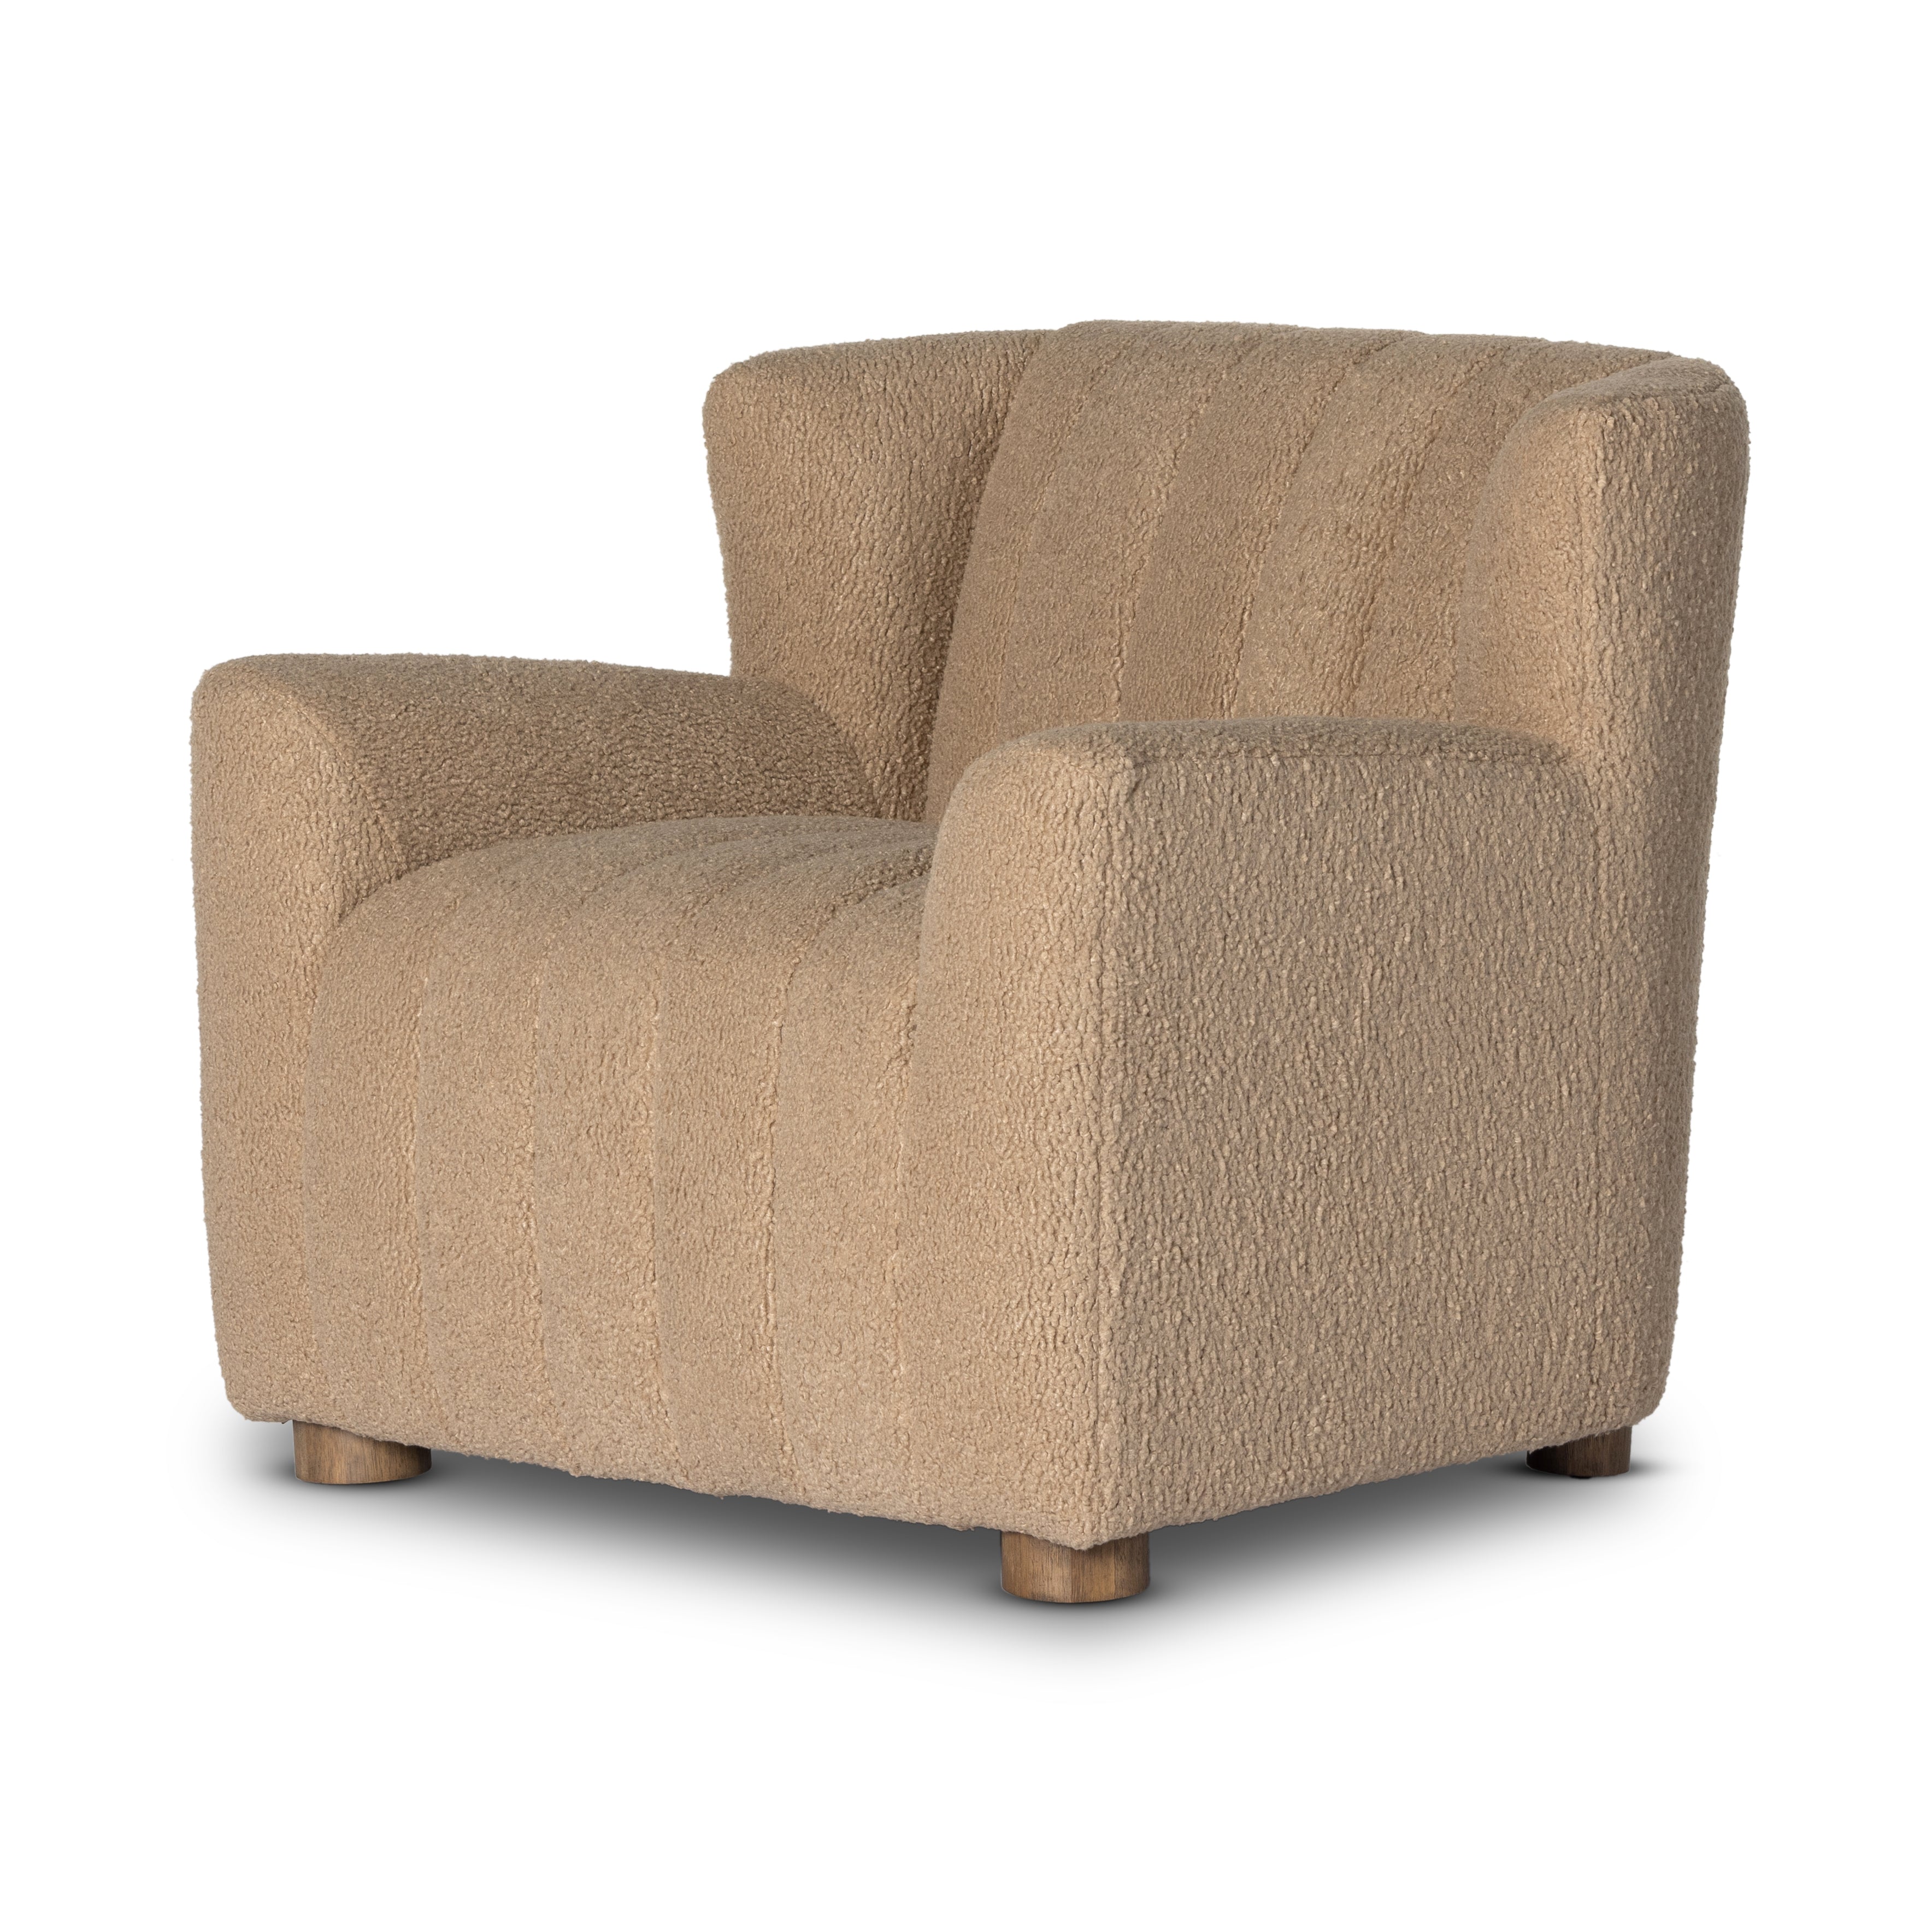 The classic wing-back club chair adopts heavy channeling for an even-comfier sit. Highly textural poly fiber fabric brings this retro lounge-inspired chair up to modern speed. Amethyst Home provides interior design, new construction, custom furniture and area rugs in the Washington metro area